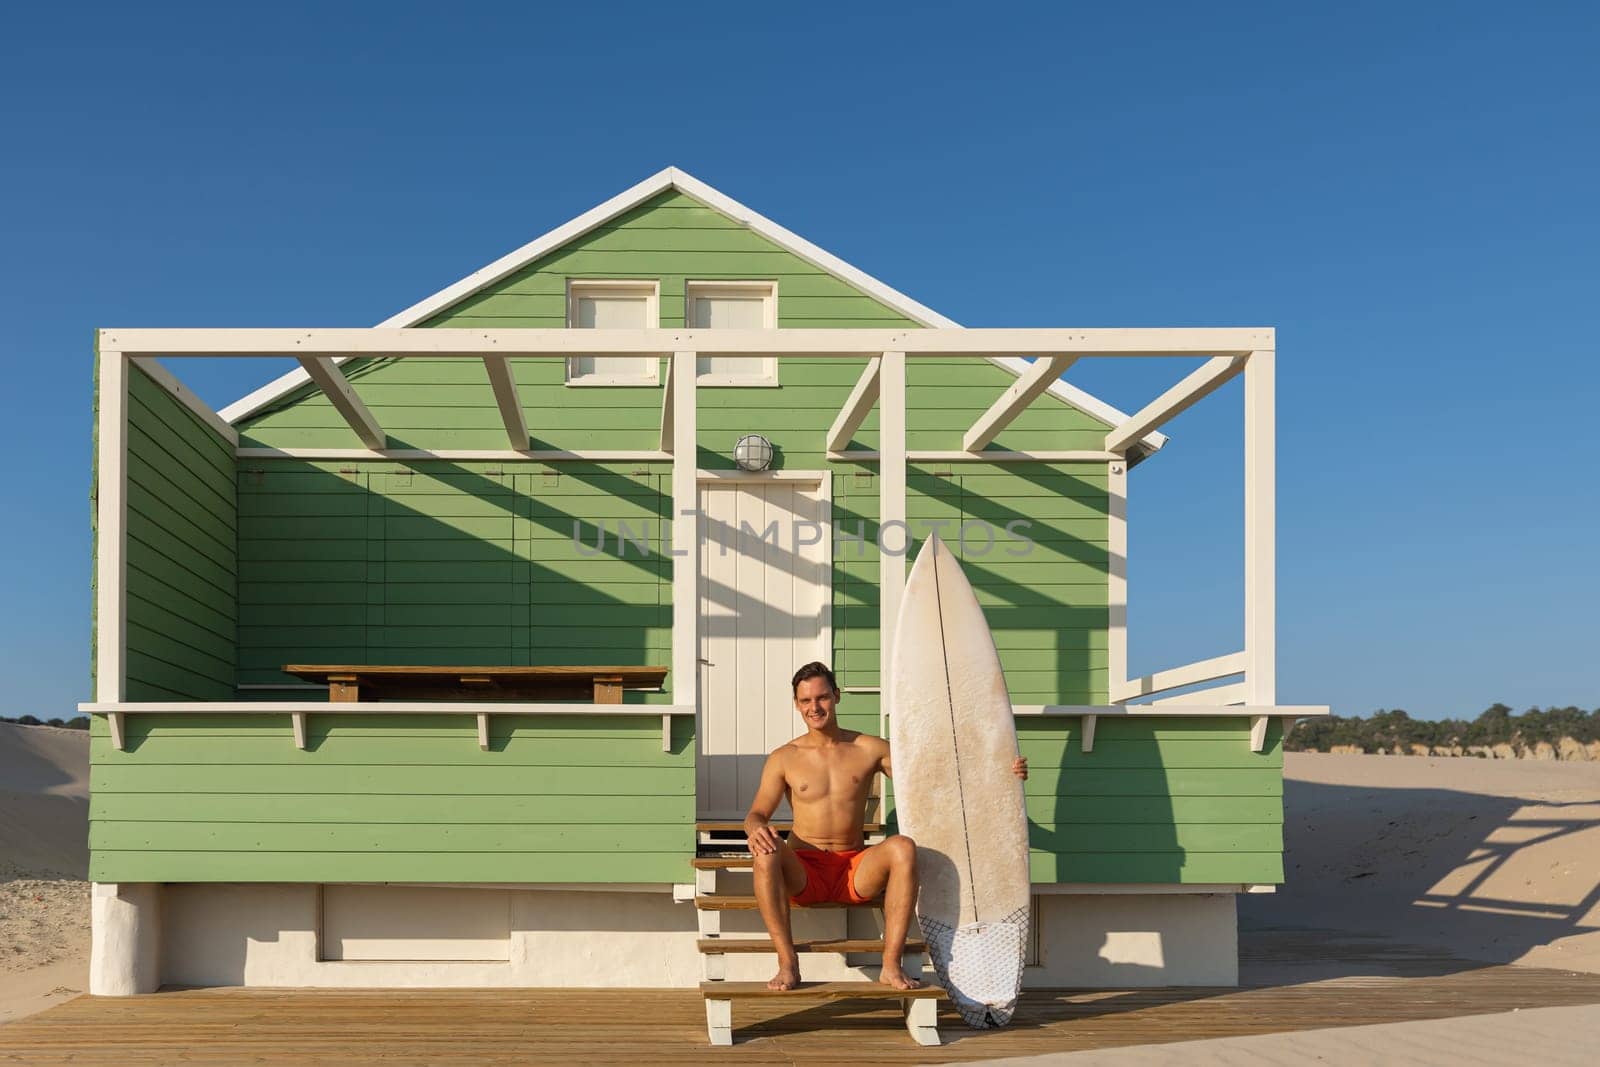 A smiling man surfer sits on the stairs at a shore house on the beach. Mid shot